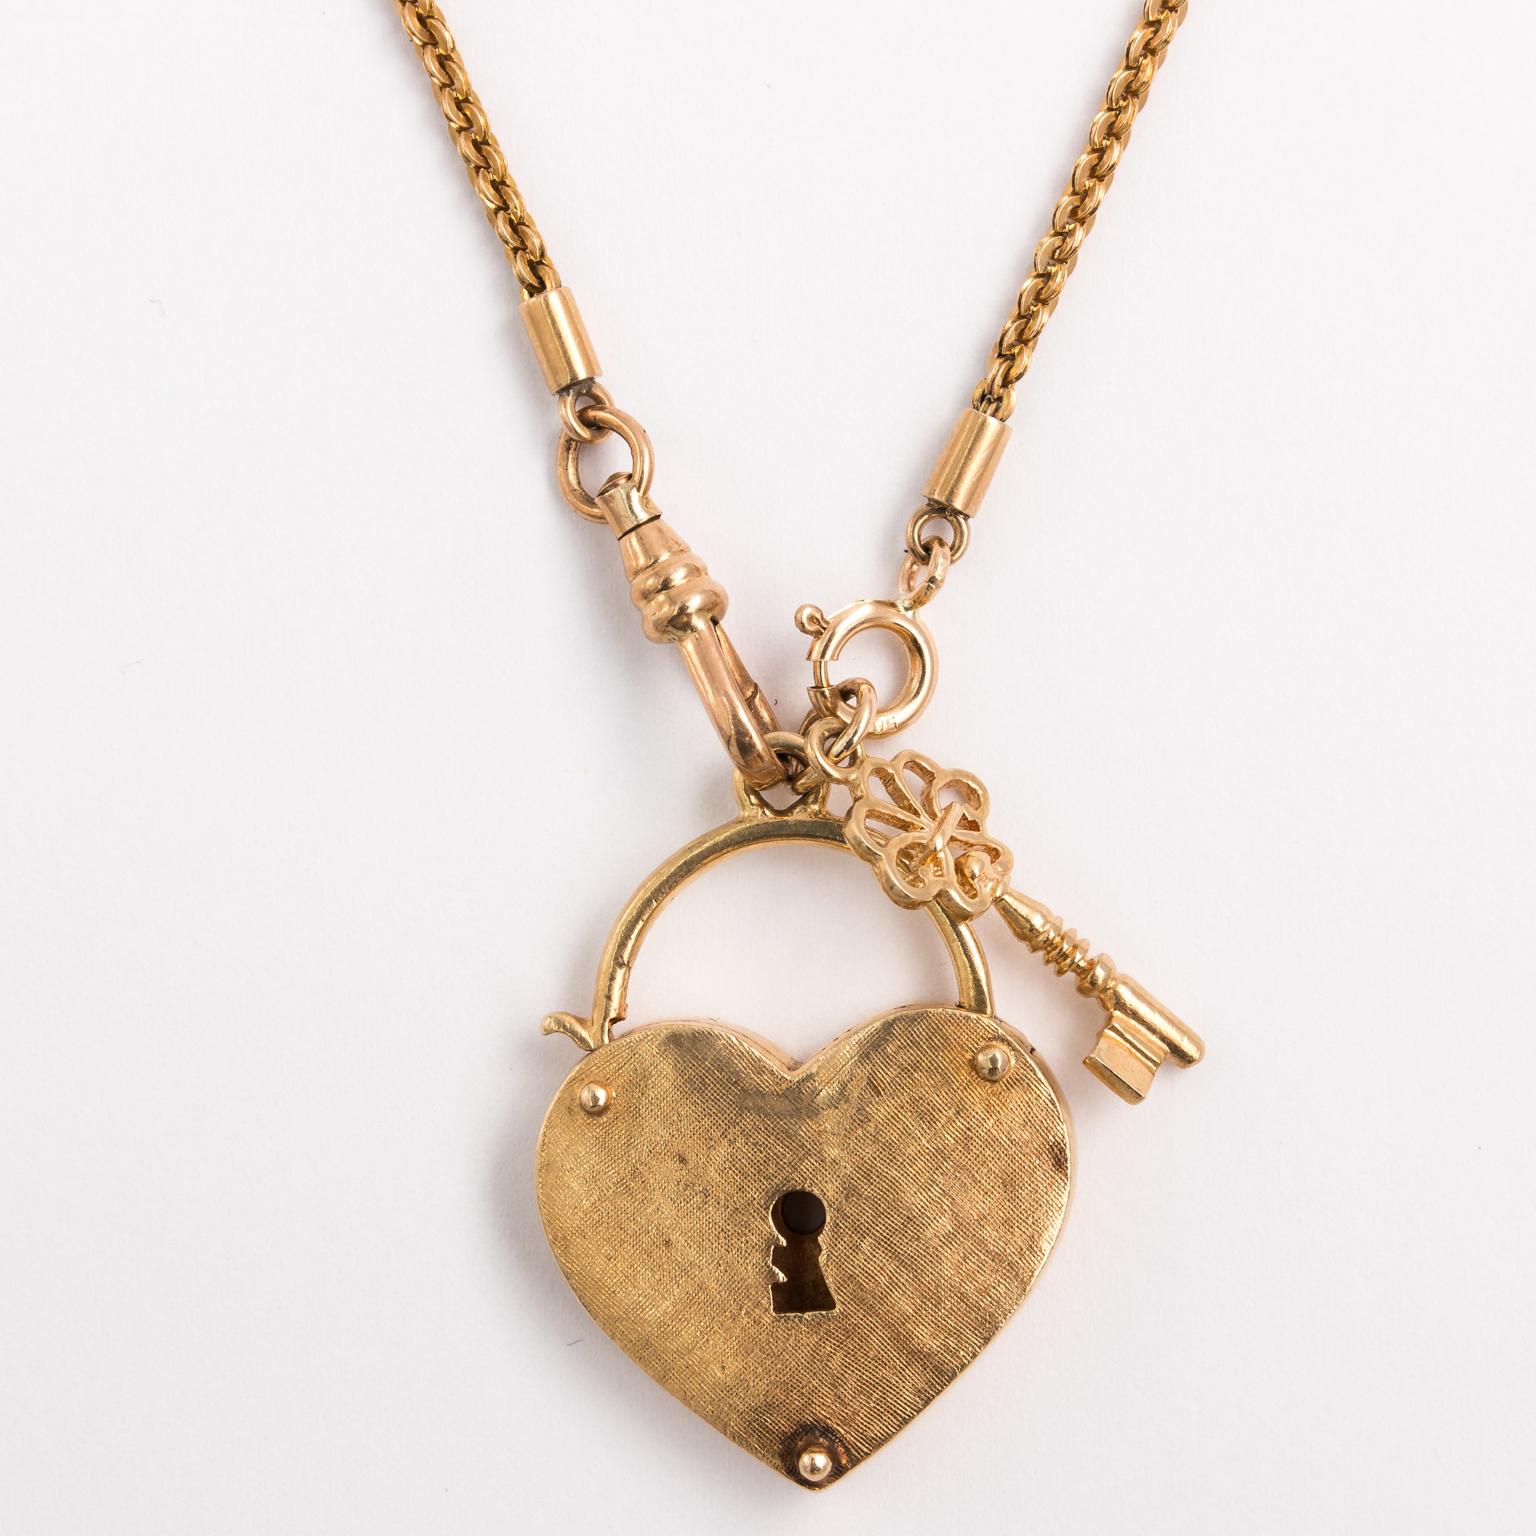 14 Karat Gold Heart with Key Necklace In Good Condition For Sale In St.amford, CT